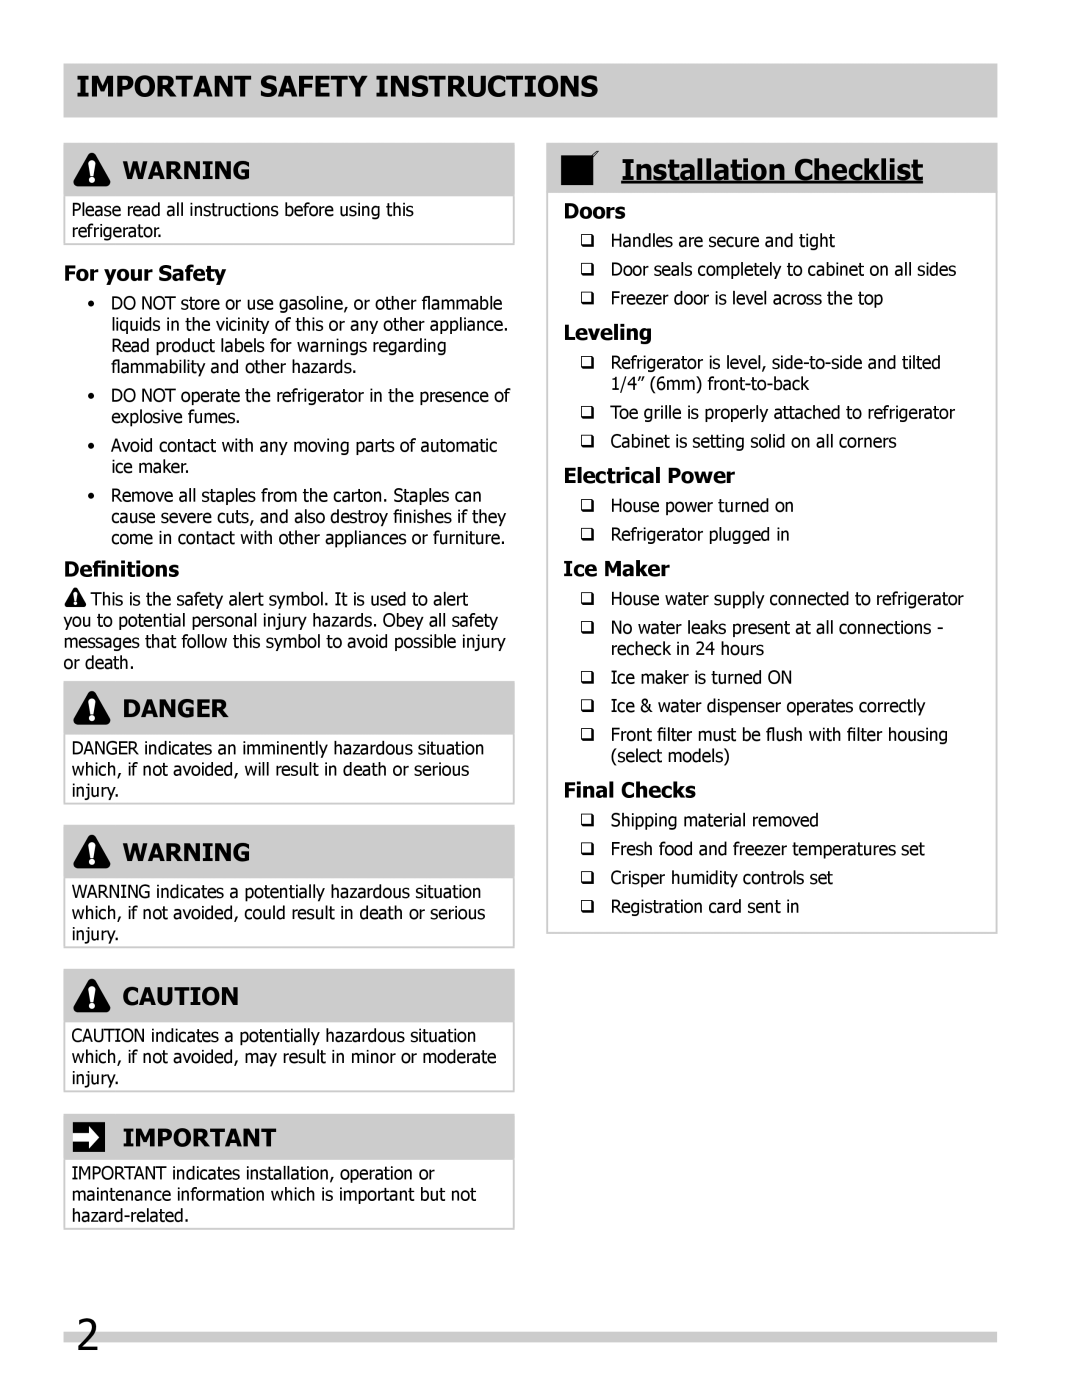 Frigidaire 242108500 Important Safety Instructions, Installation Checklist, Danger, For your Safety, Definitions, Doors 